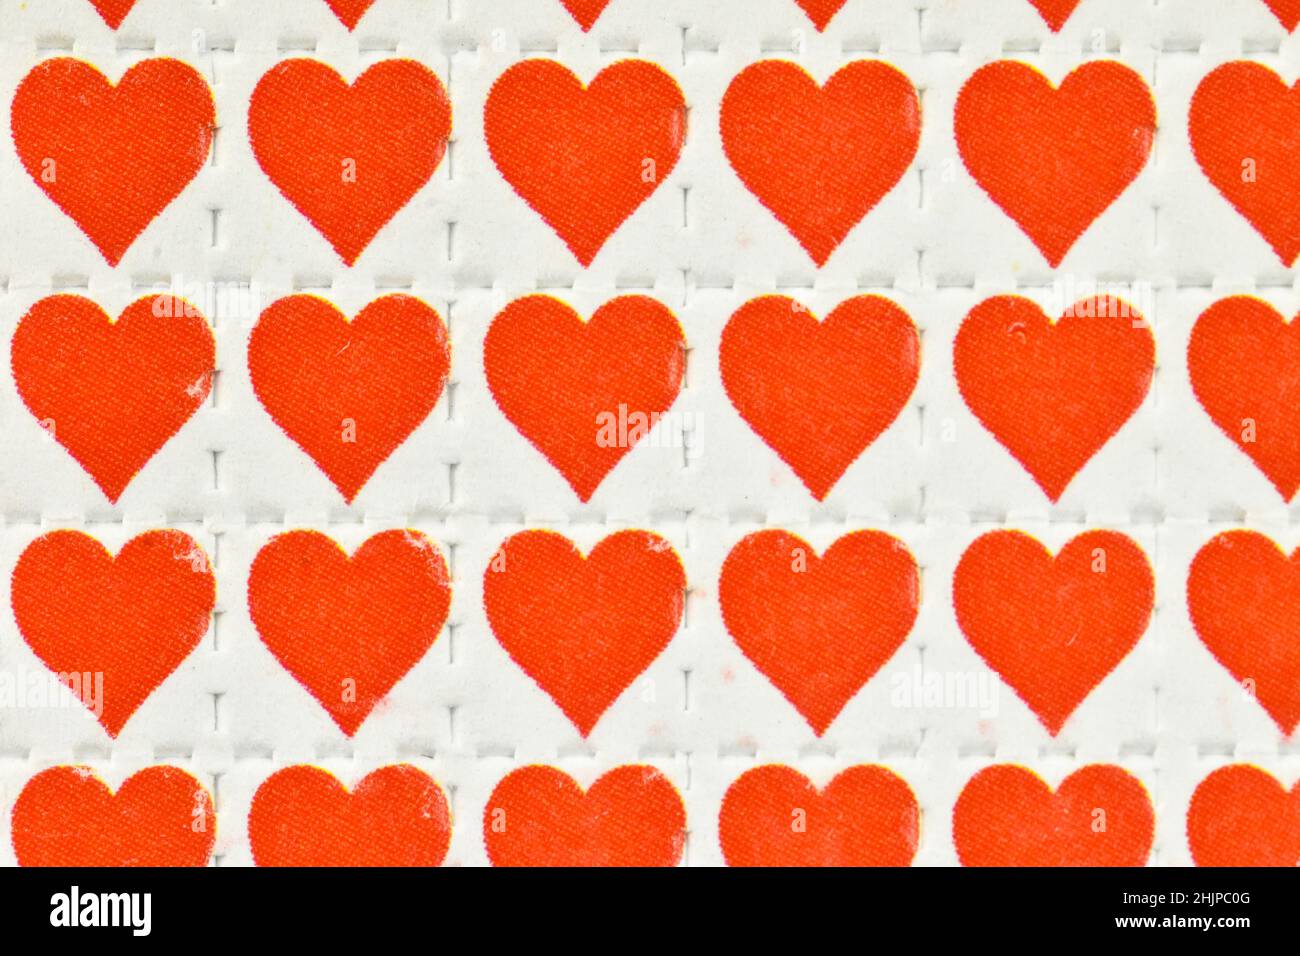 Love hearts acid trips, Blotting paper impregnated with the drug L.S.D. Stock Photo